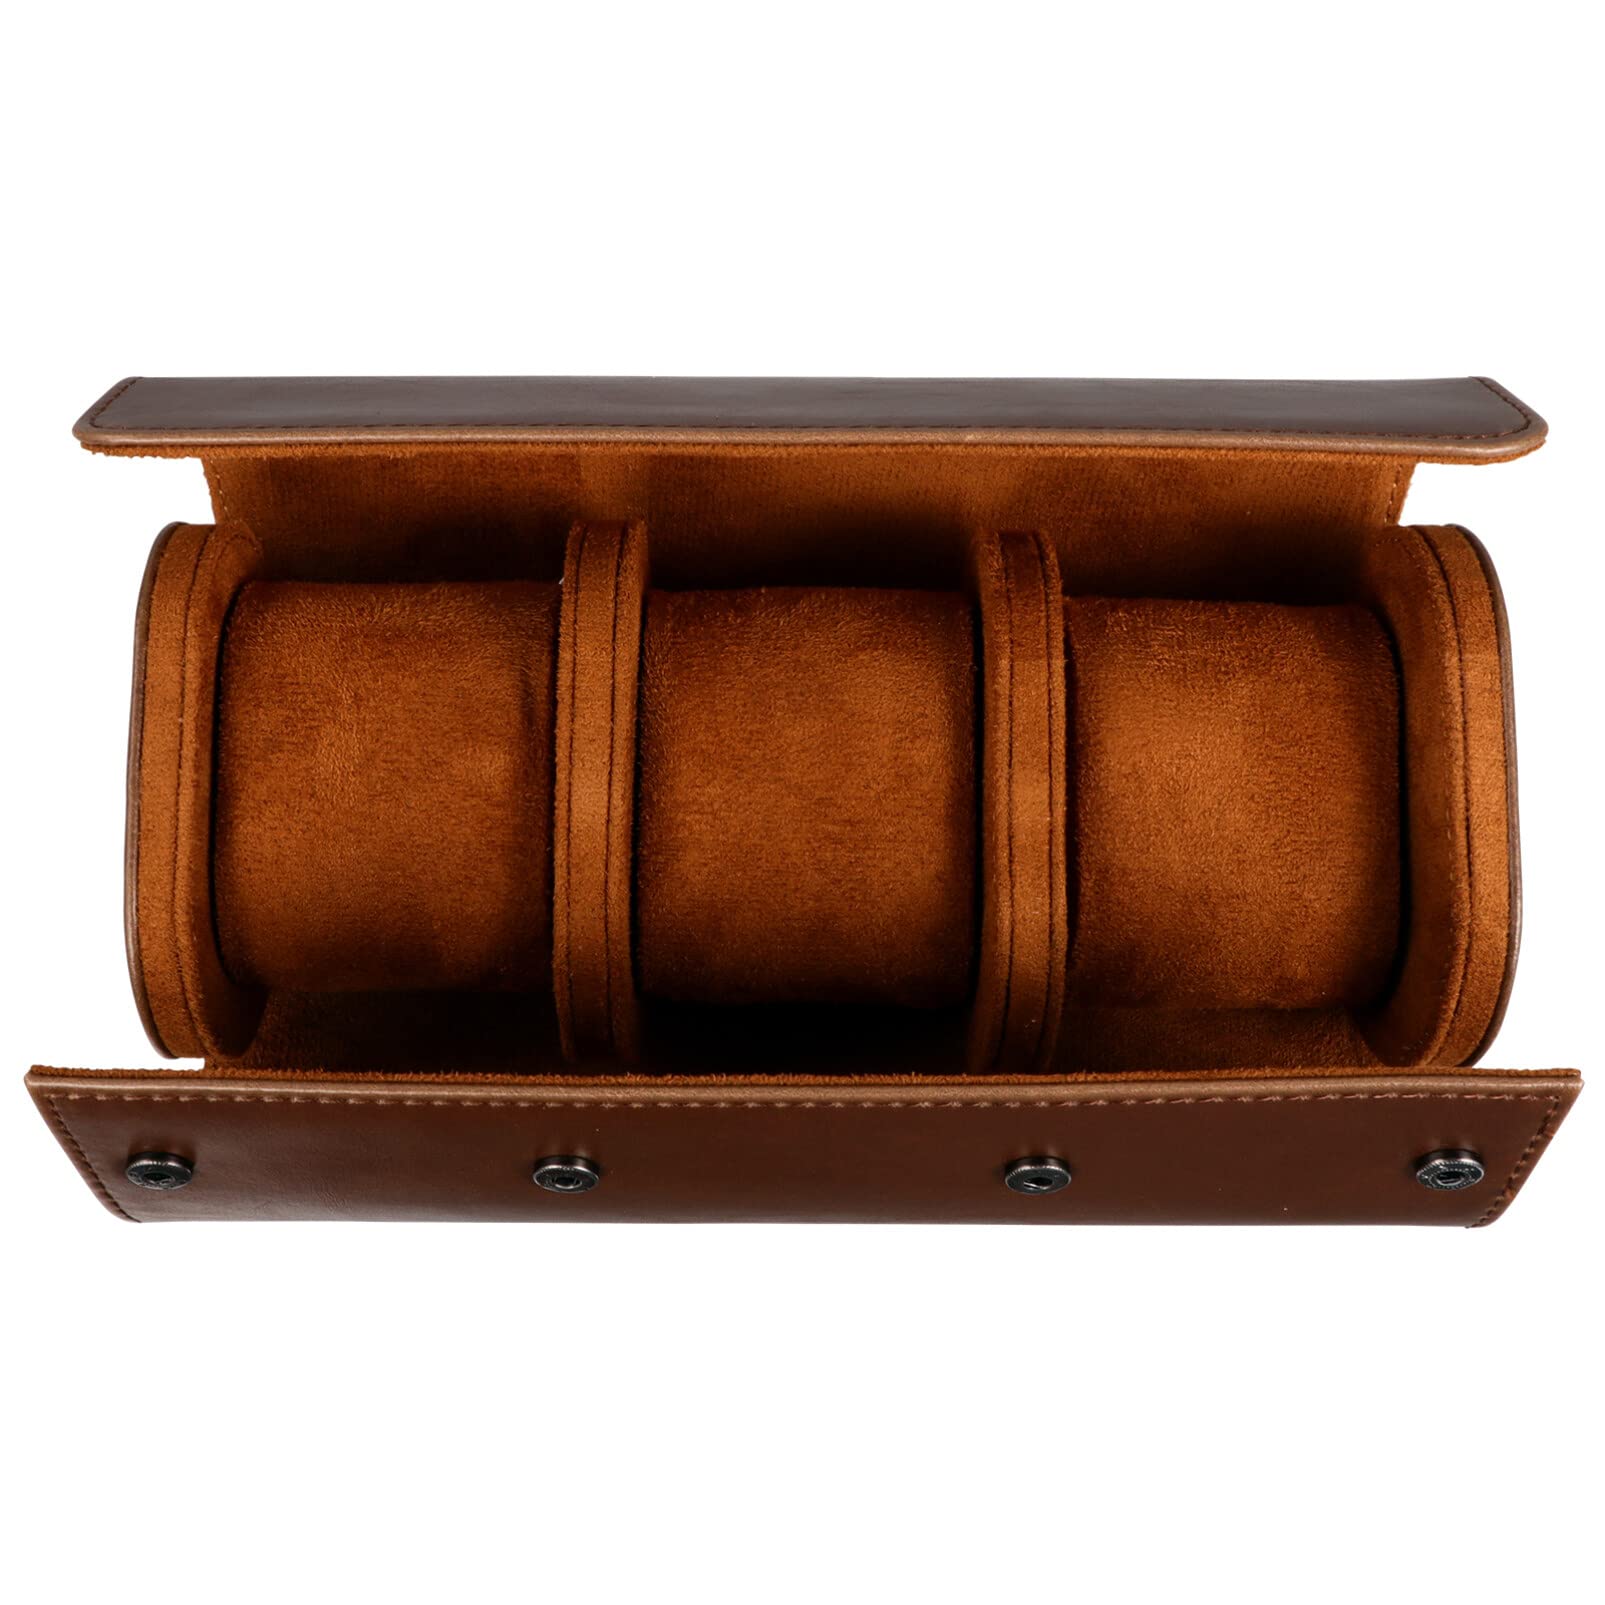 ULTECHNOVO Watch Box Storage Roll, 3 Slots Elastic PU Watch Case- Leather Vintage Display Case Organizer for Watch Jewelry, Portable Use for Traveling